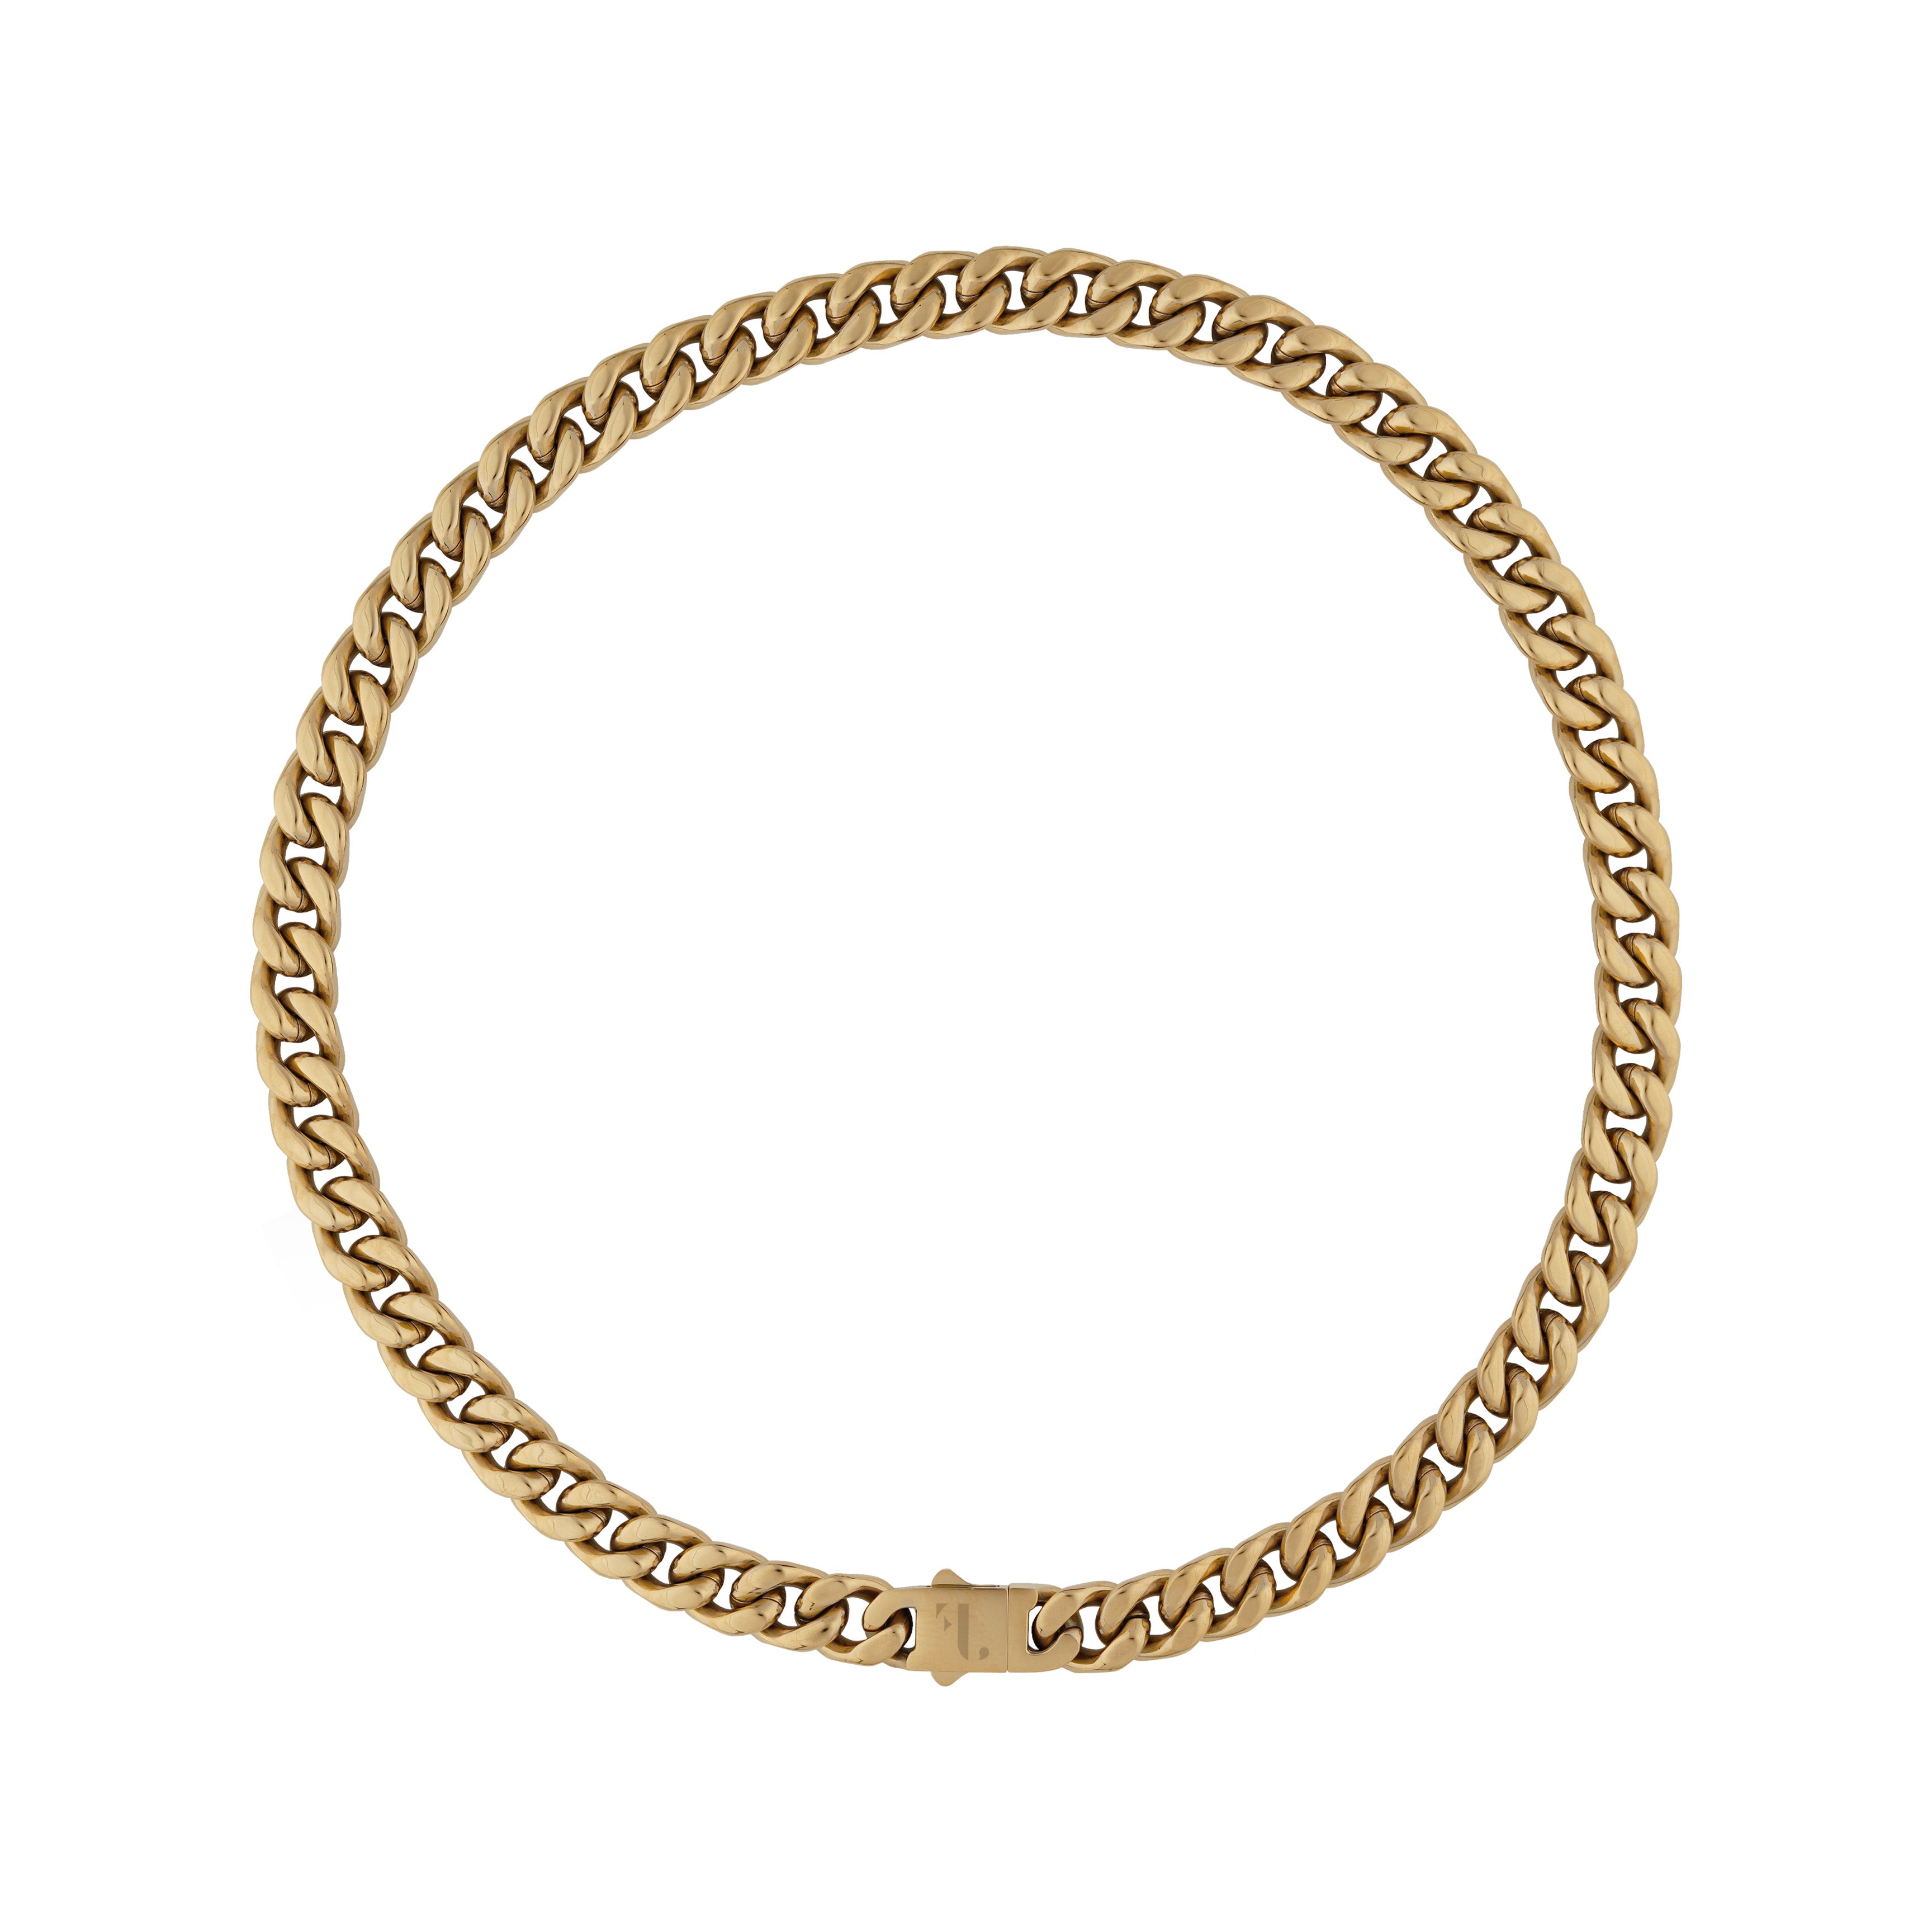 Cass men's necklace by Five Jwlry, designed with a 10mm tightly woven Cuban link chain in a gold hue, crafted from water-resistant 316L stainless steel. Available in sizes 40cm, 45cm, 50cm, 55cm and 60cm. Hypoallergenic and accompanied by a 2-year warranty.